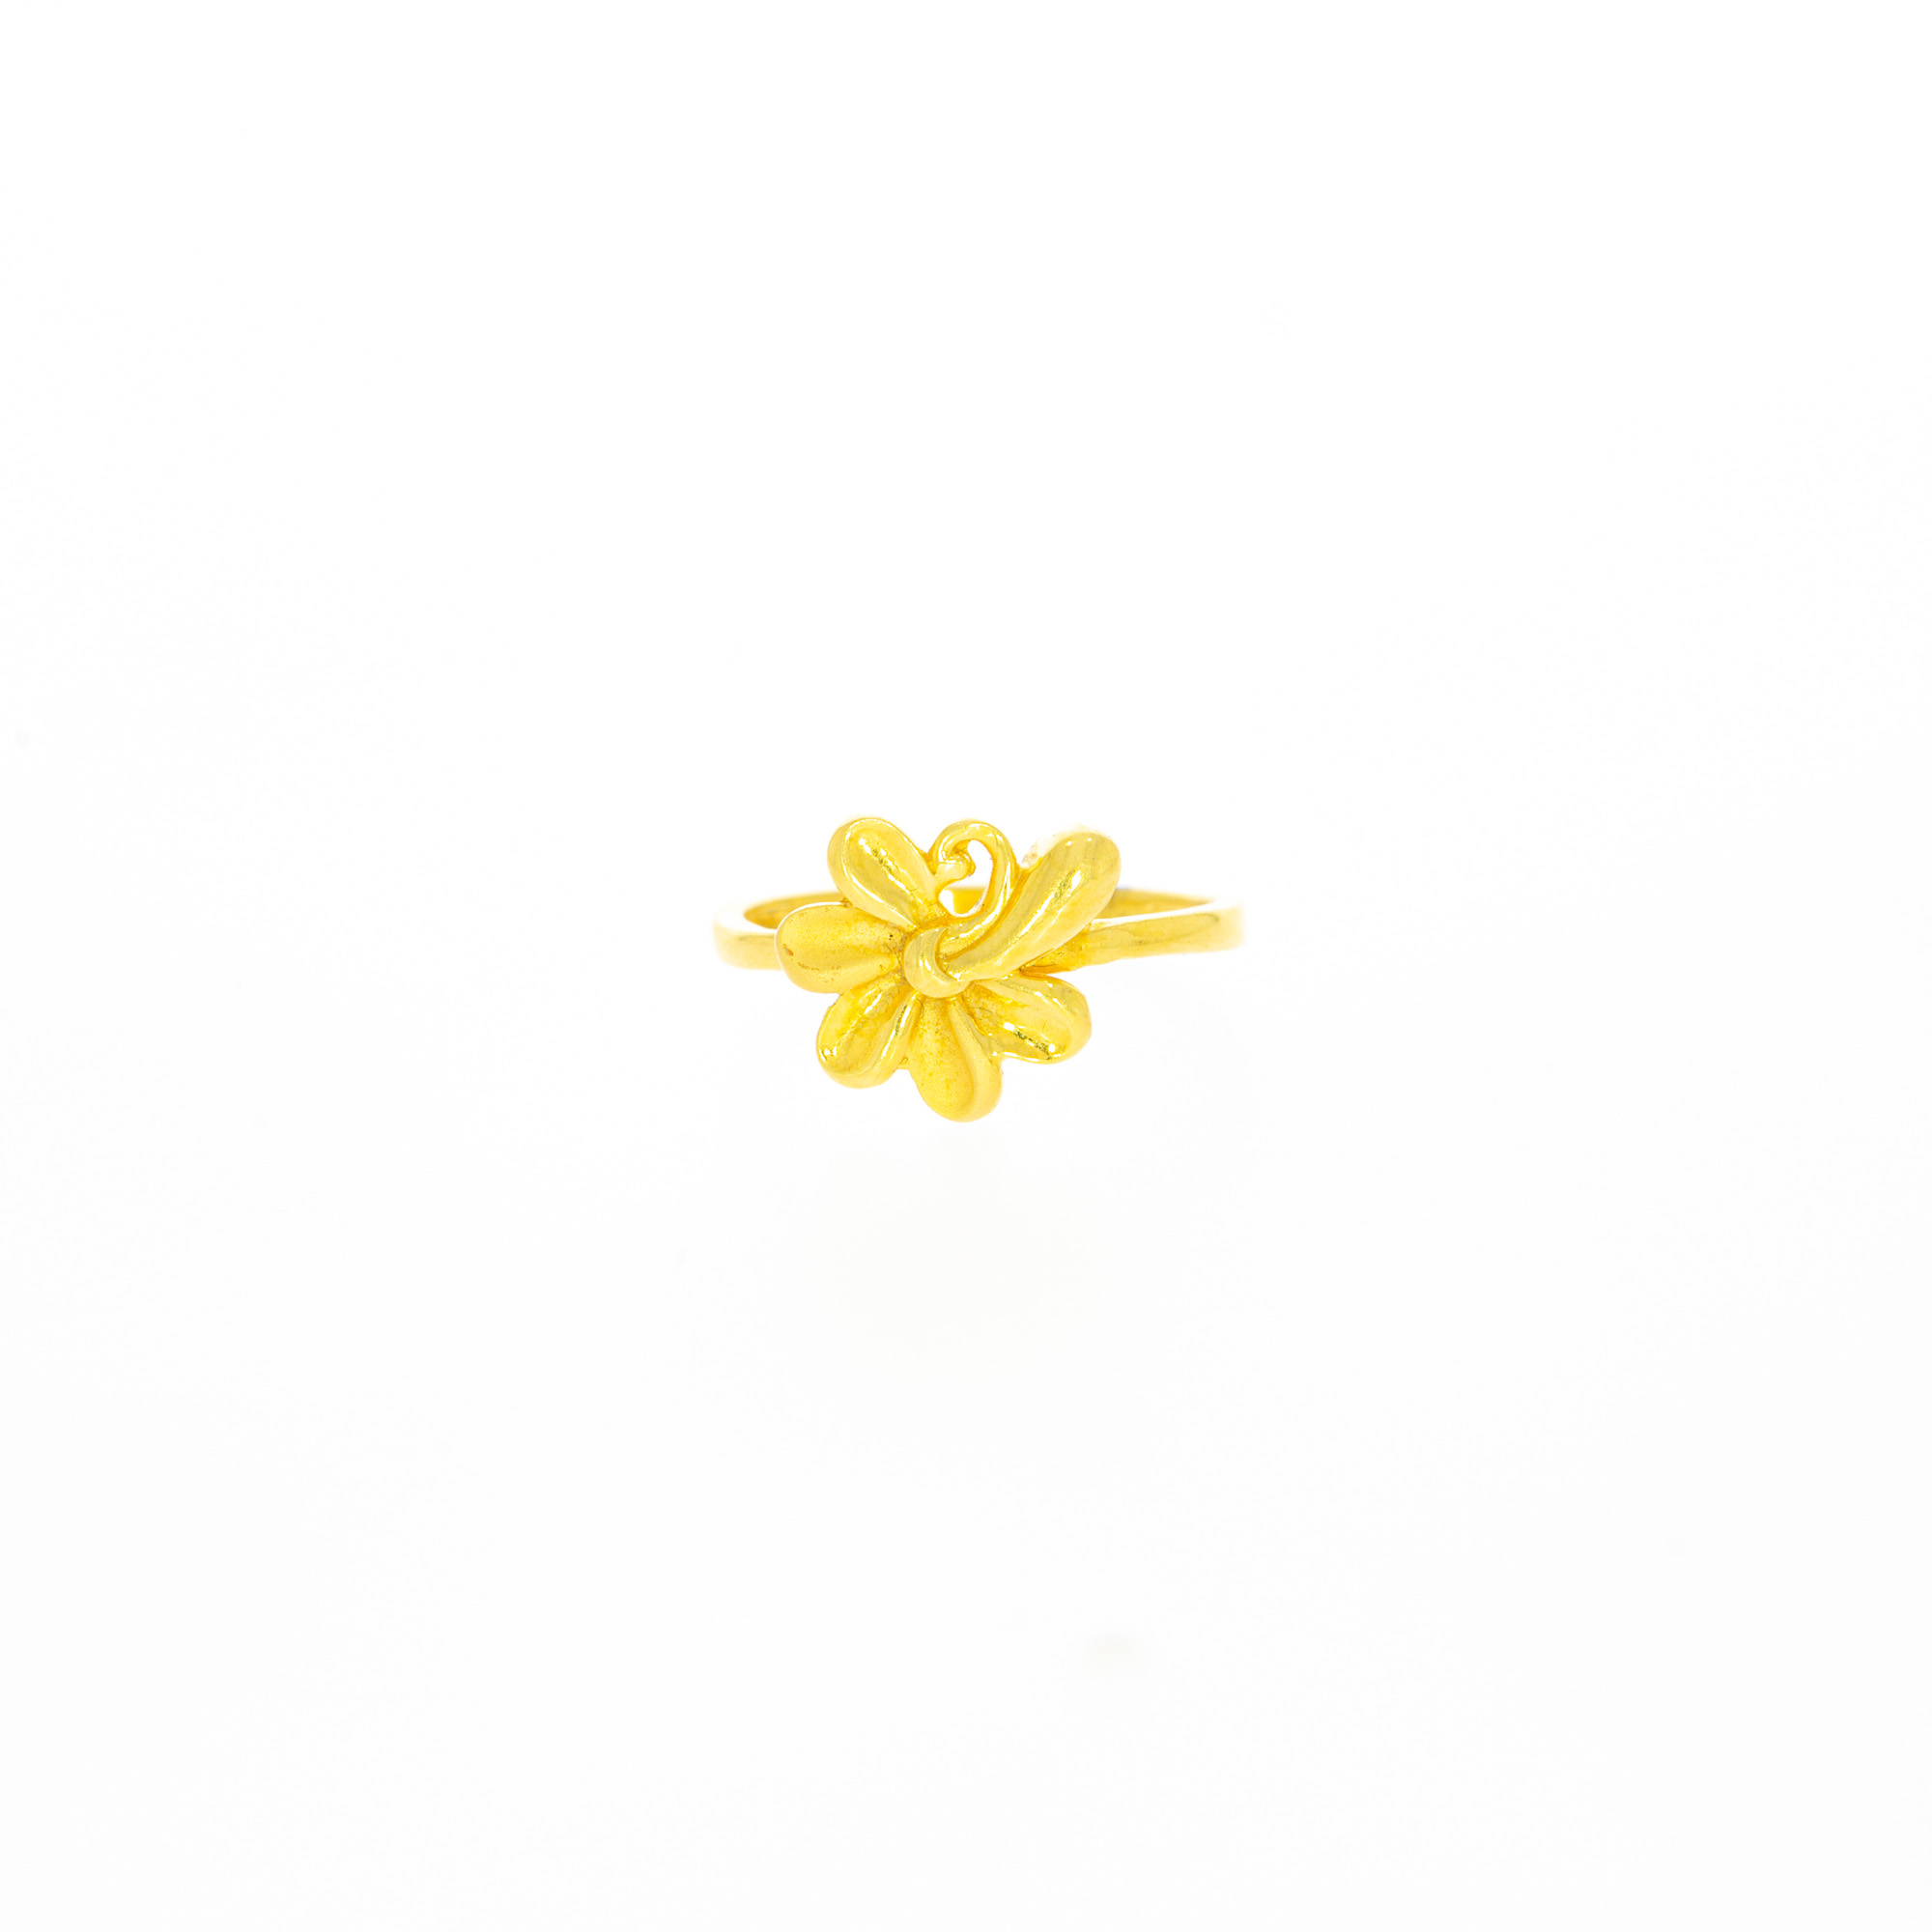 Blooming Flower 22kt Gold Ring